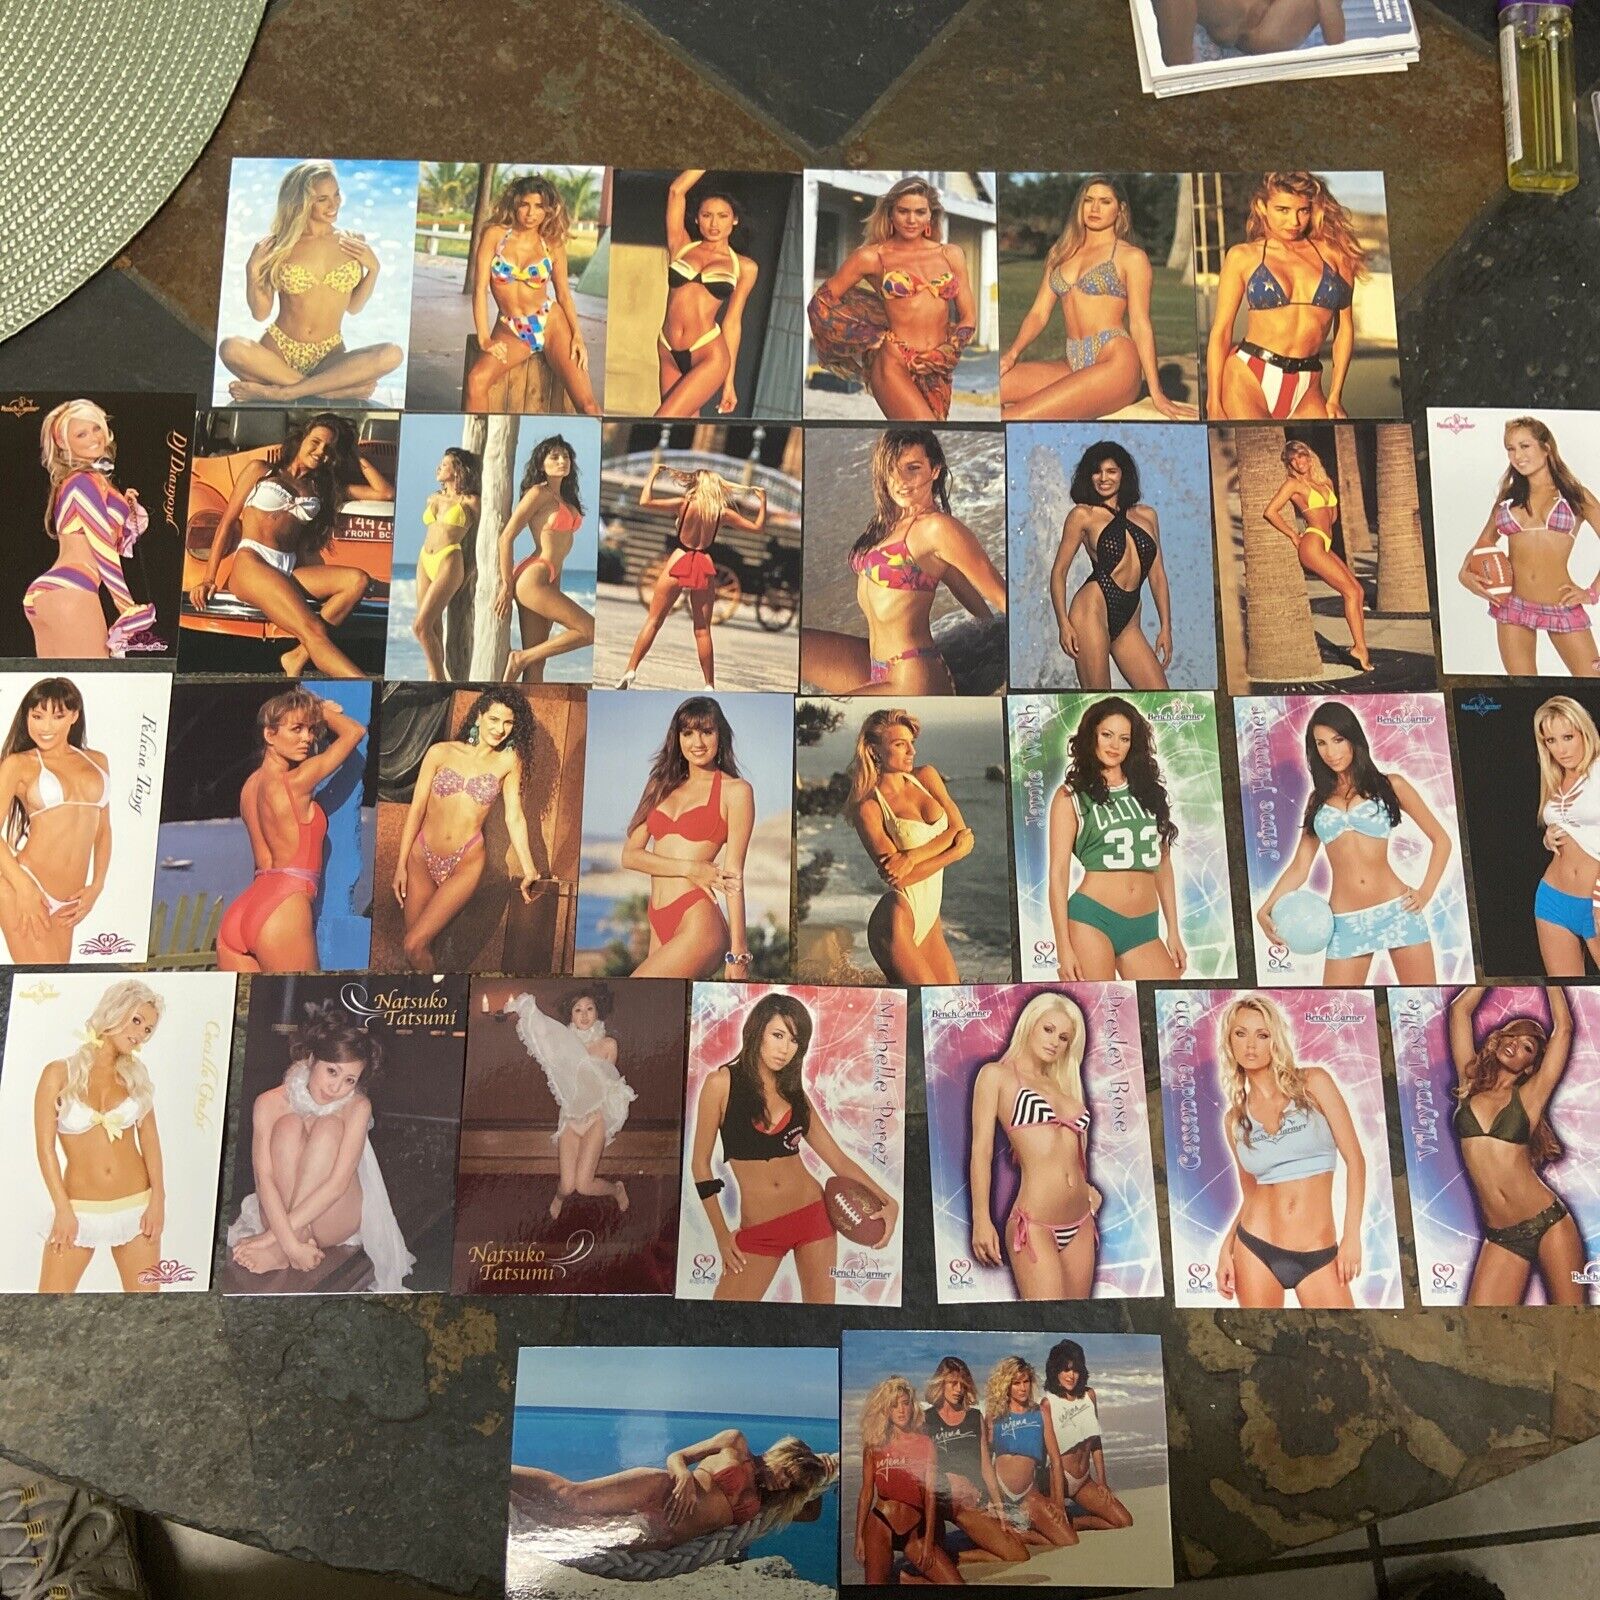 30 Sexy Swimsuit Model Cards - Blowout Look Great Value